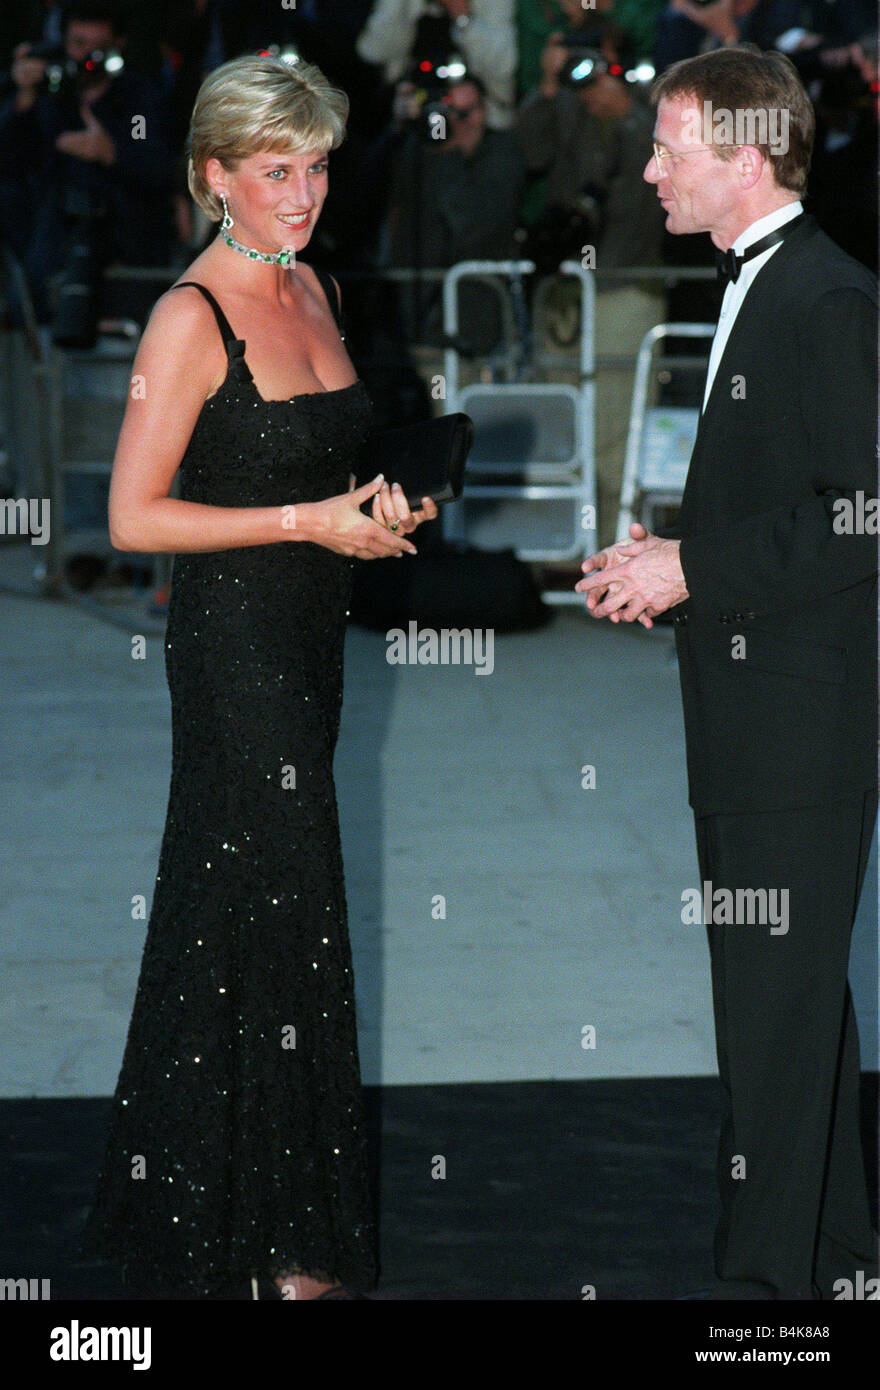 Princess Diana arrives at the Tate Gallery in London for a gala evening sponsored by Chanel 1st July 1997 The Gallery is celebrating its one hundreth anniversary this year and Princess Diana was celebrating her thirty sixth birthday today Stock Photo